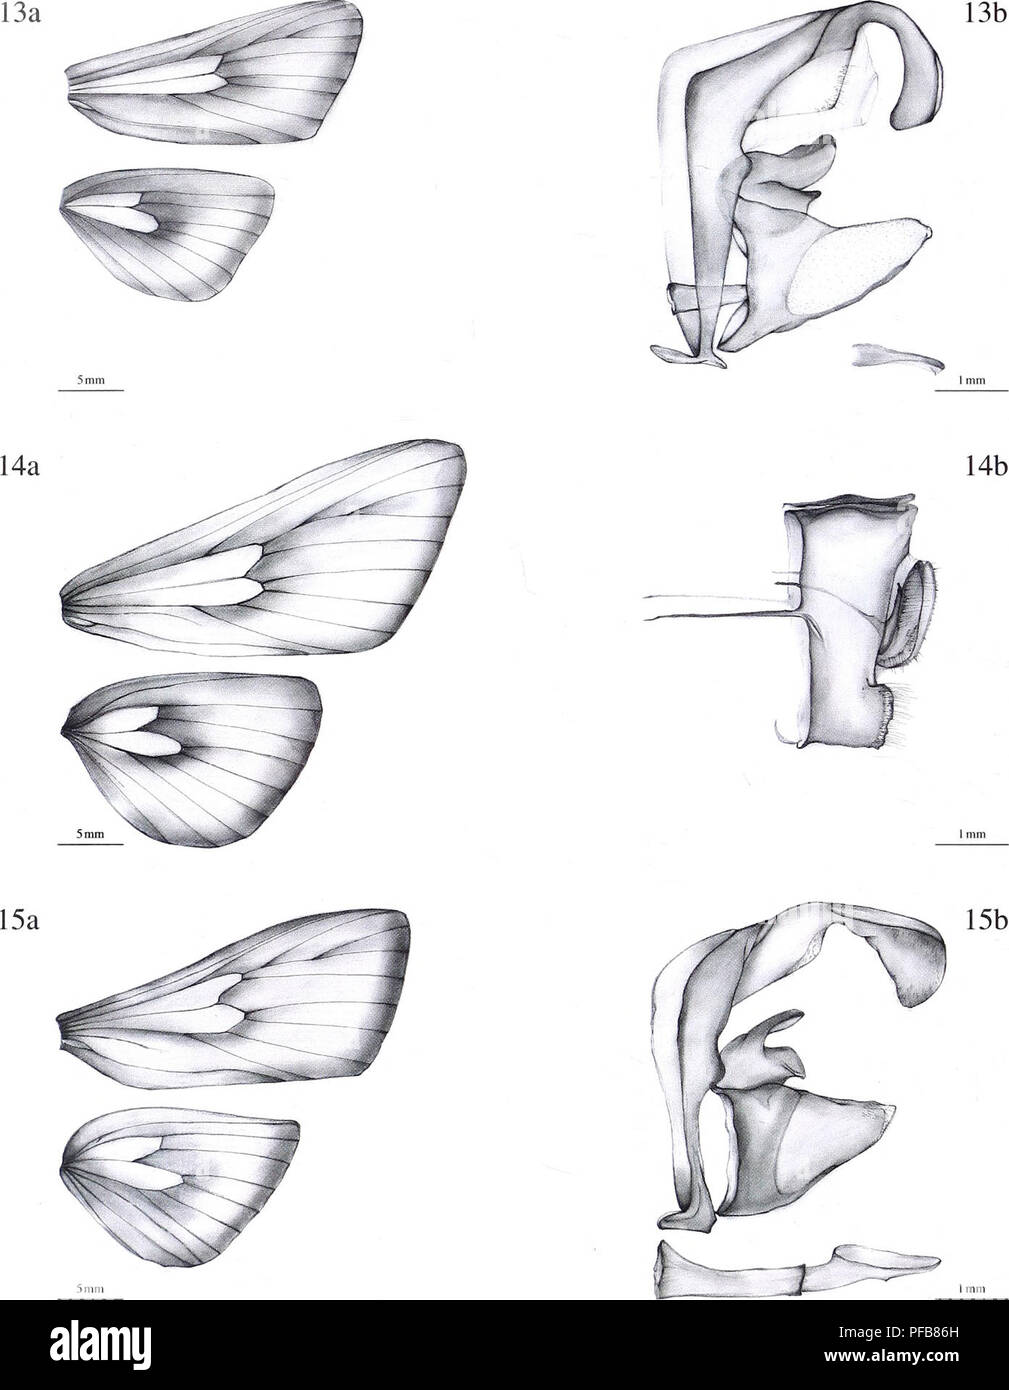 . The description of a new genus and twenty-three new species of Metarbelidae (Lepidoptera : Cossoidea) from the lowland tropical rain forests of the Guineo-Congolian Region with notes on habitats and biogeography / Ingo Lehmannn. 52. Figure 13a. Wing venation of: Haberlandia isakaensis spec, no v., male, holotype. 14a. Haberlandia rudolphi spec, nov., female, holotype. 15a. Haberlandia isiroensis spec, nov., male, holotype. Figure 13b. Genitalia of: Haberlandia isakaensis spec, nov., male, holotype. 14b. Haberlandia rudolphi spec, nov., female, holotype. 15b. Haberlandia isiroensis spec, nov. Stock Photo